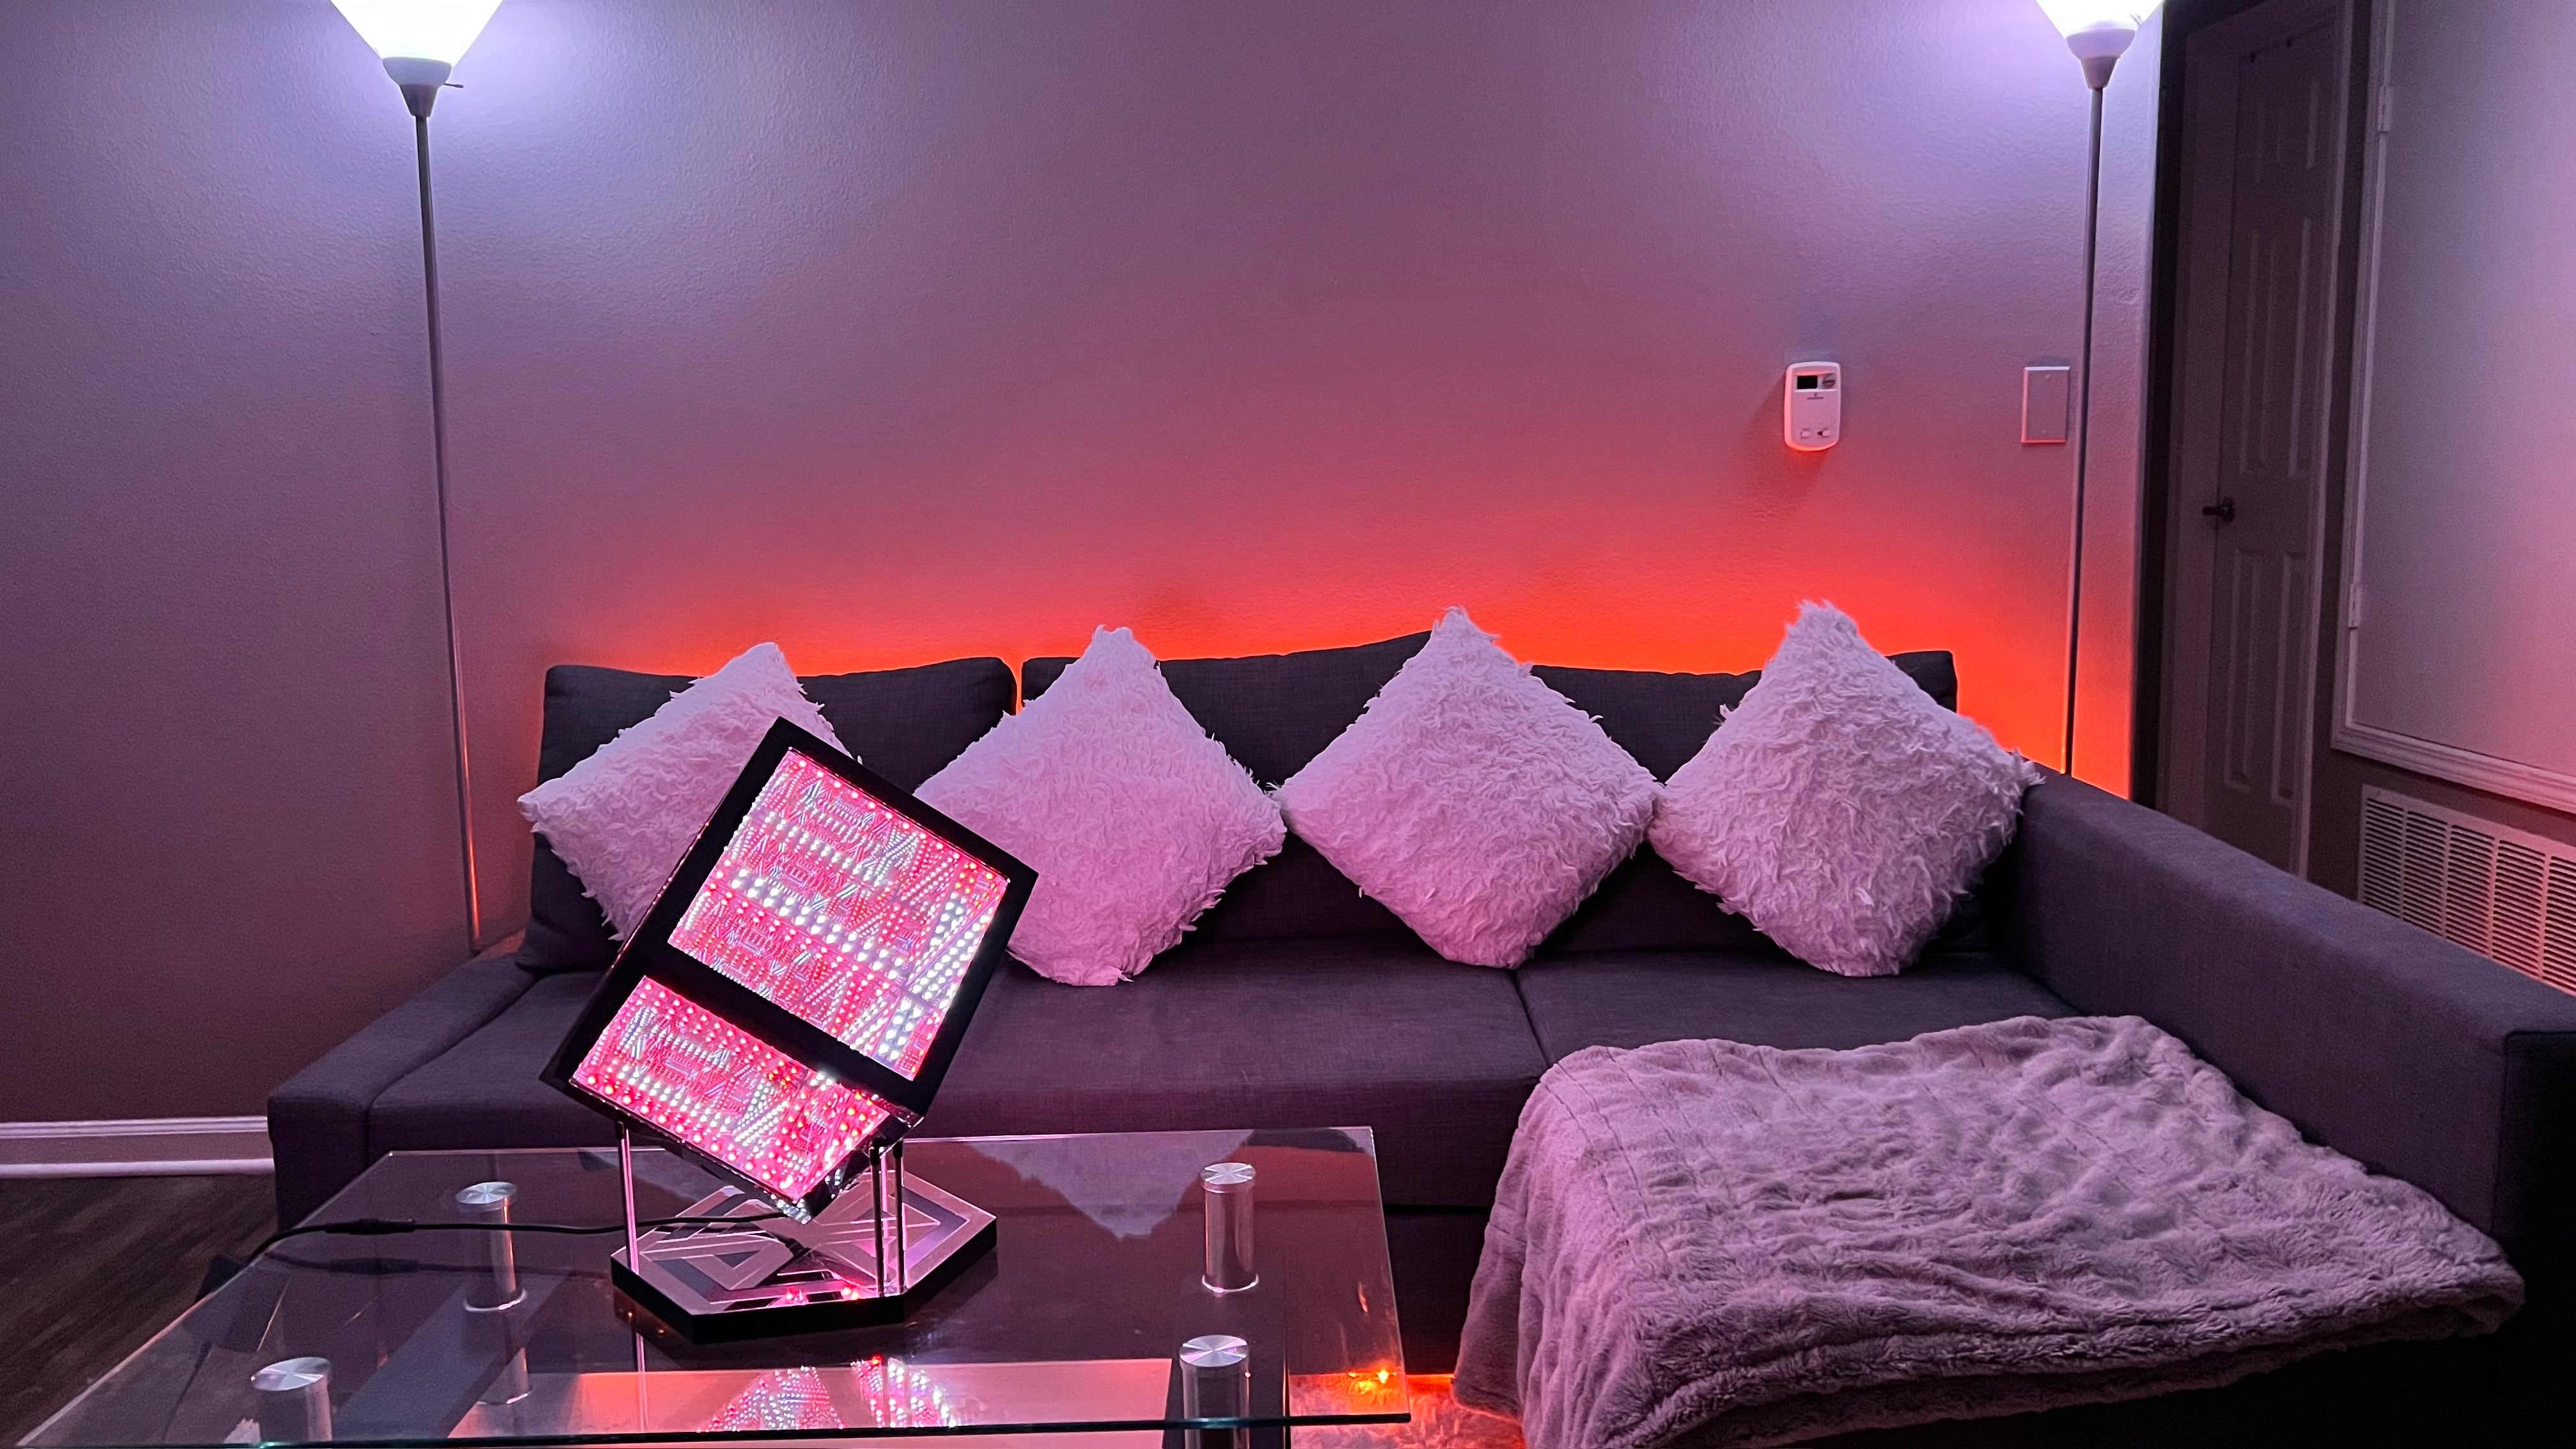 Living room with a couch that has four pillows on it, with an LED strip light under it as well as a HyperBox on the coffee table, leaving guests wondering what are infinite lights